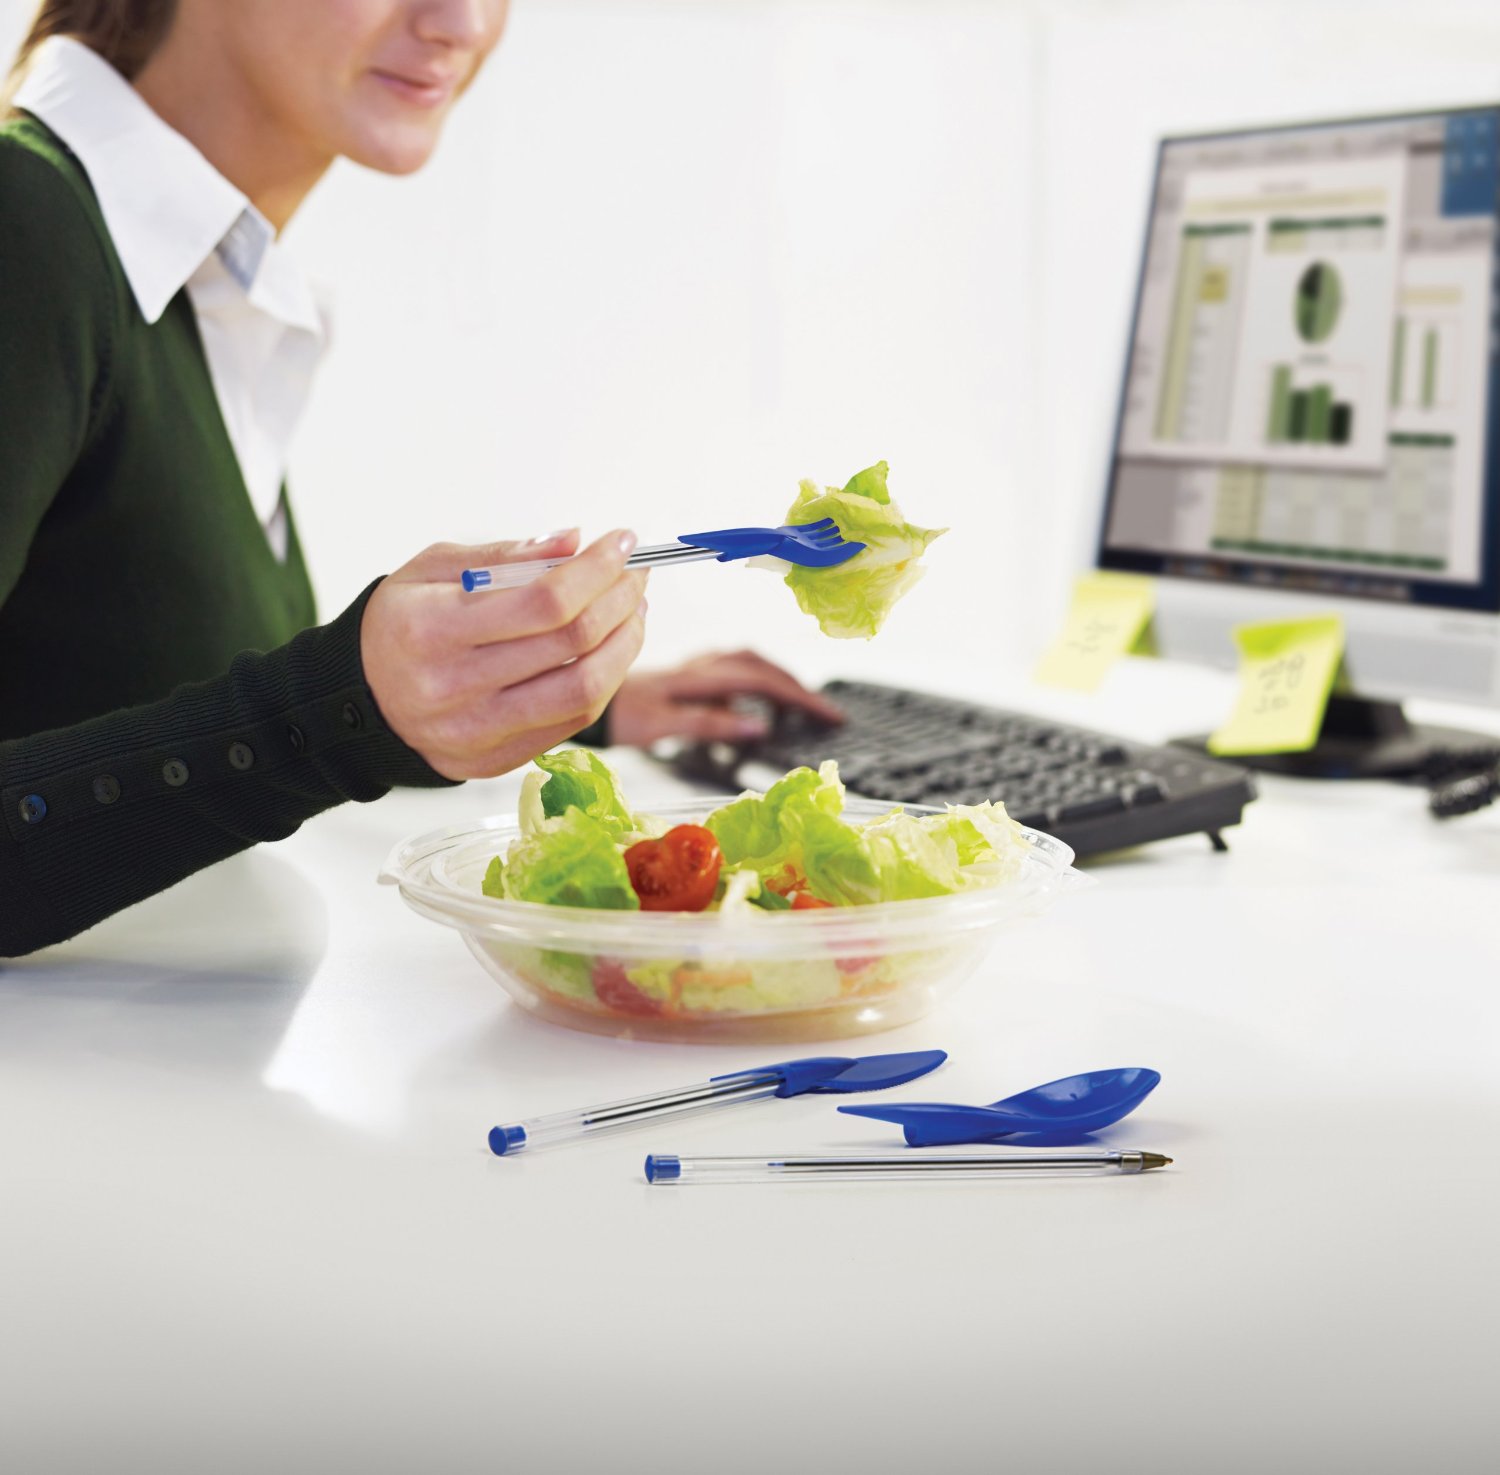 Eating at your desk? At least do it in style 